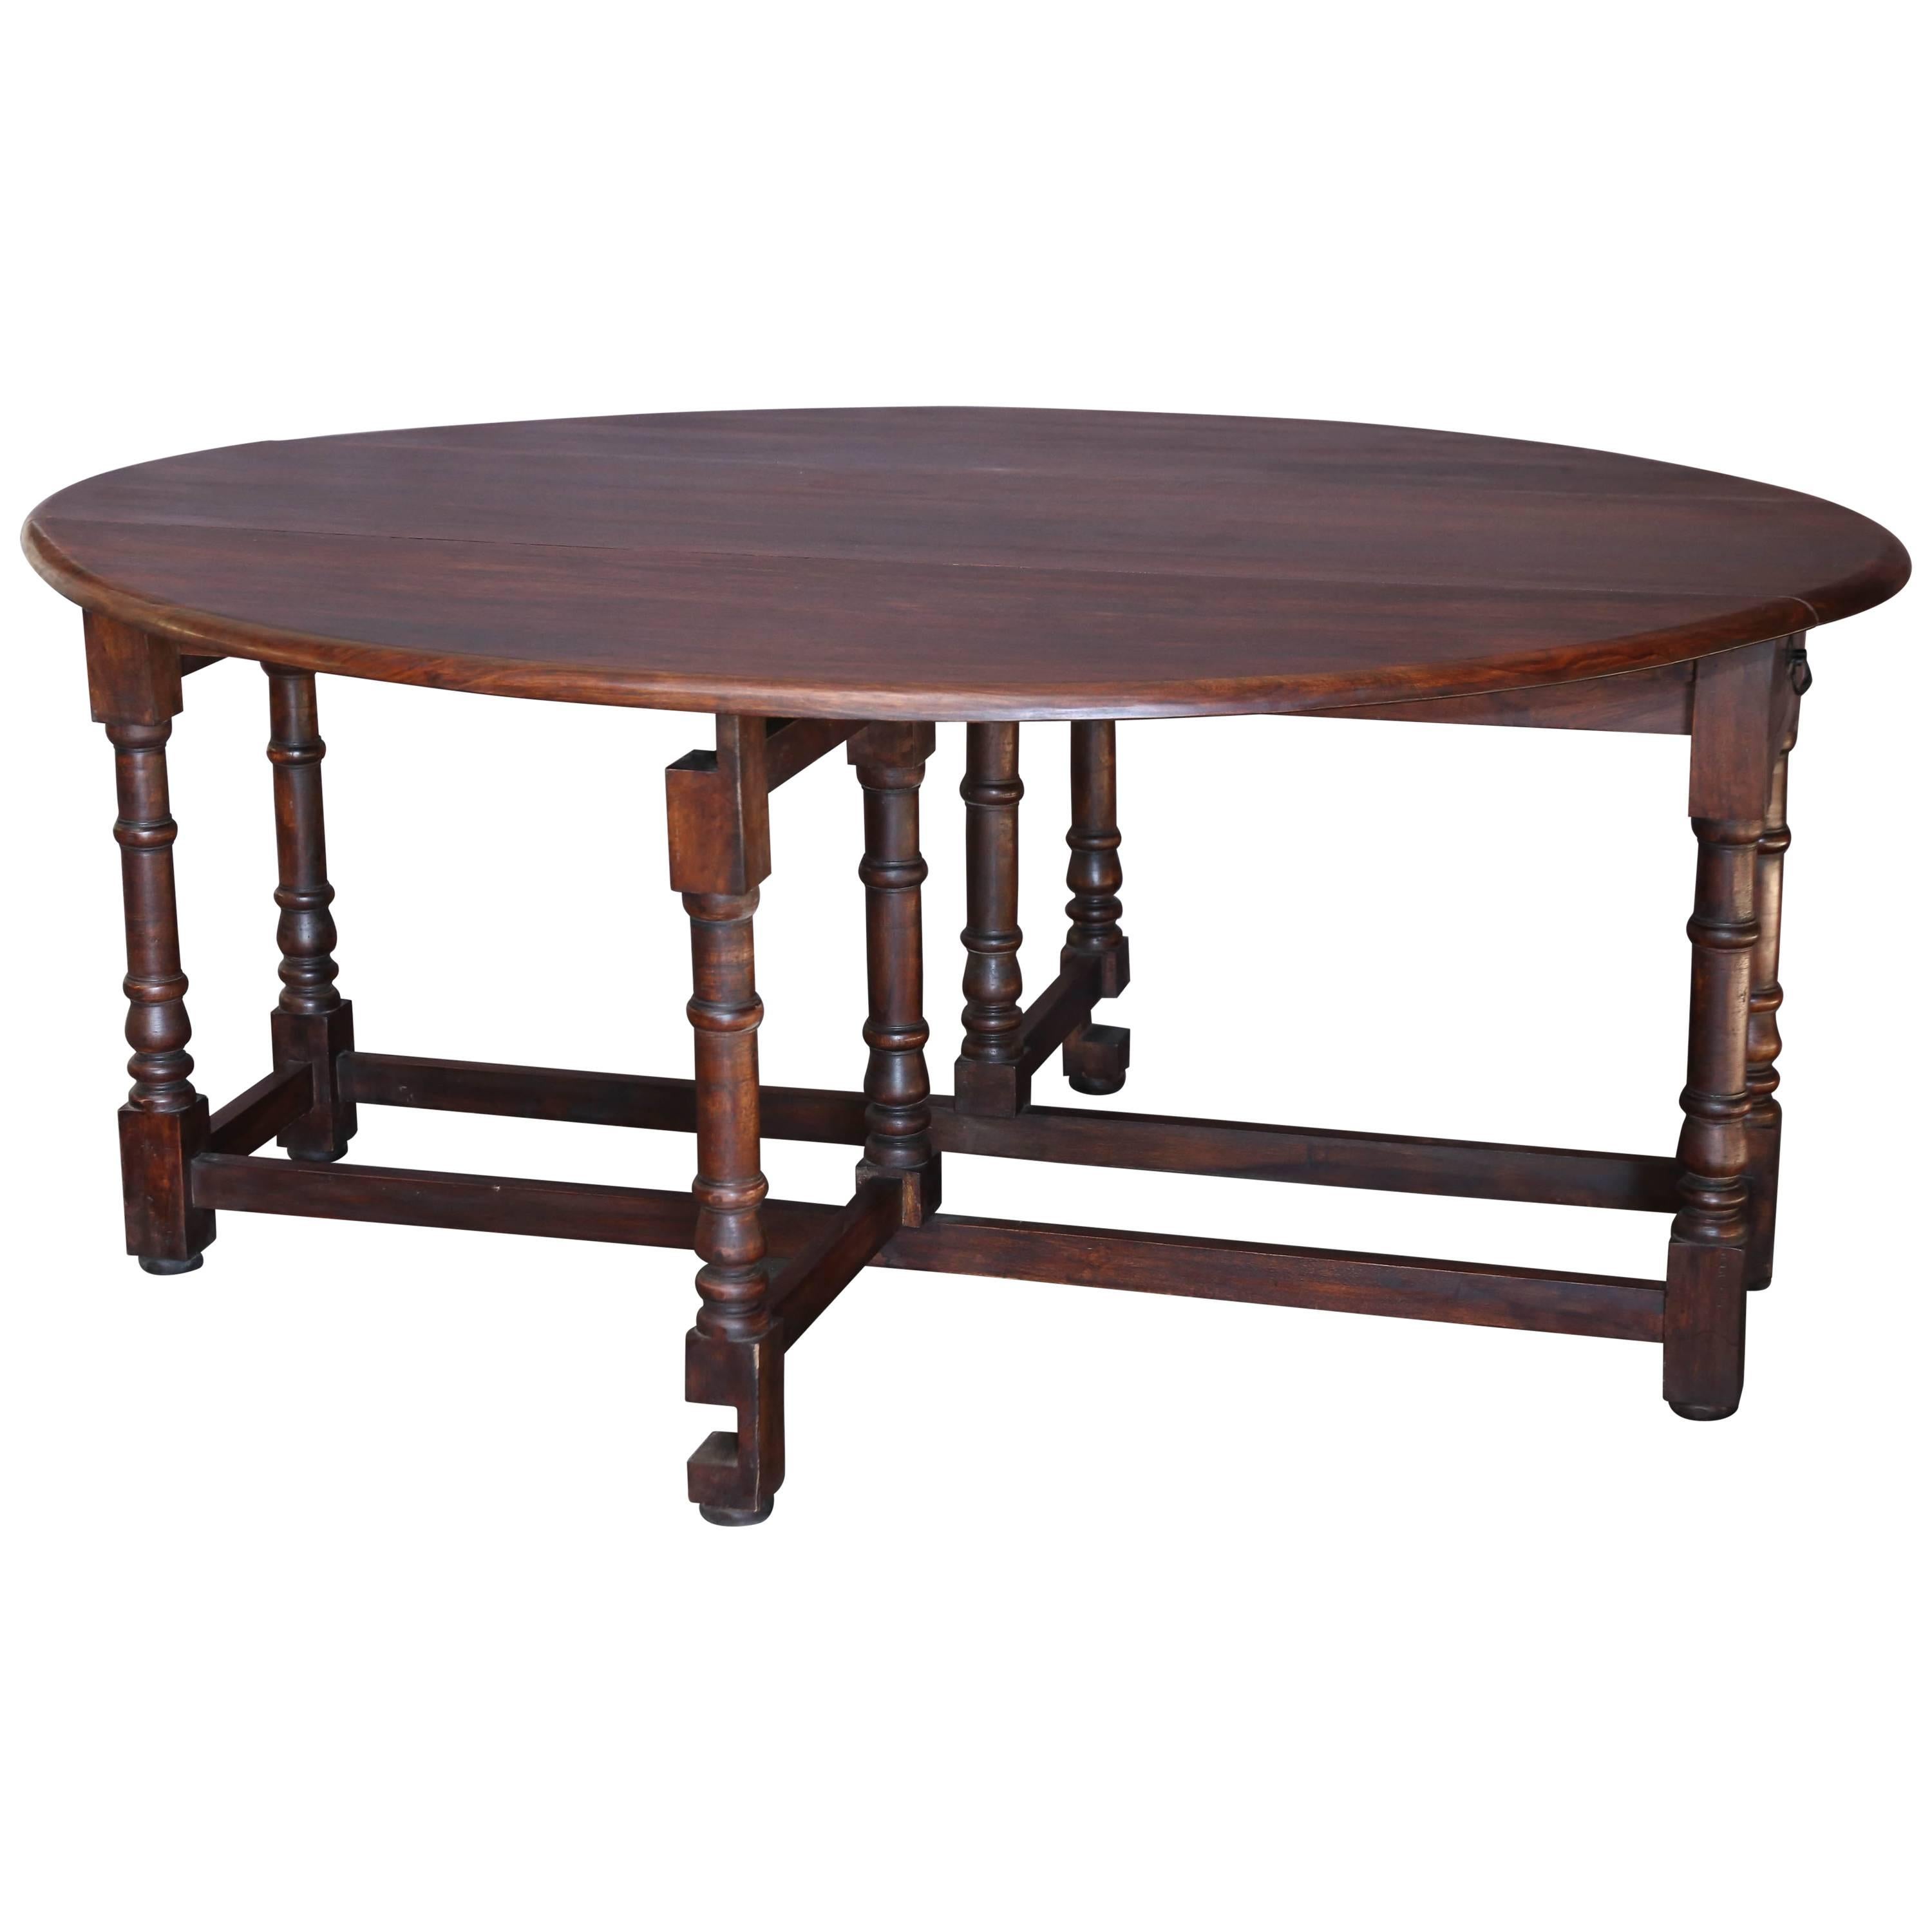 1920s Solid Teak Wood British Colonial Gate Leg Breakfast Table For Sale